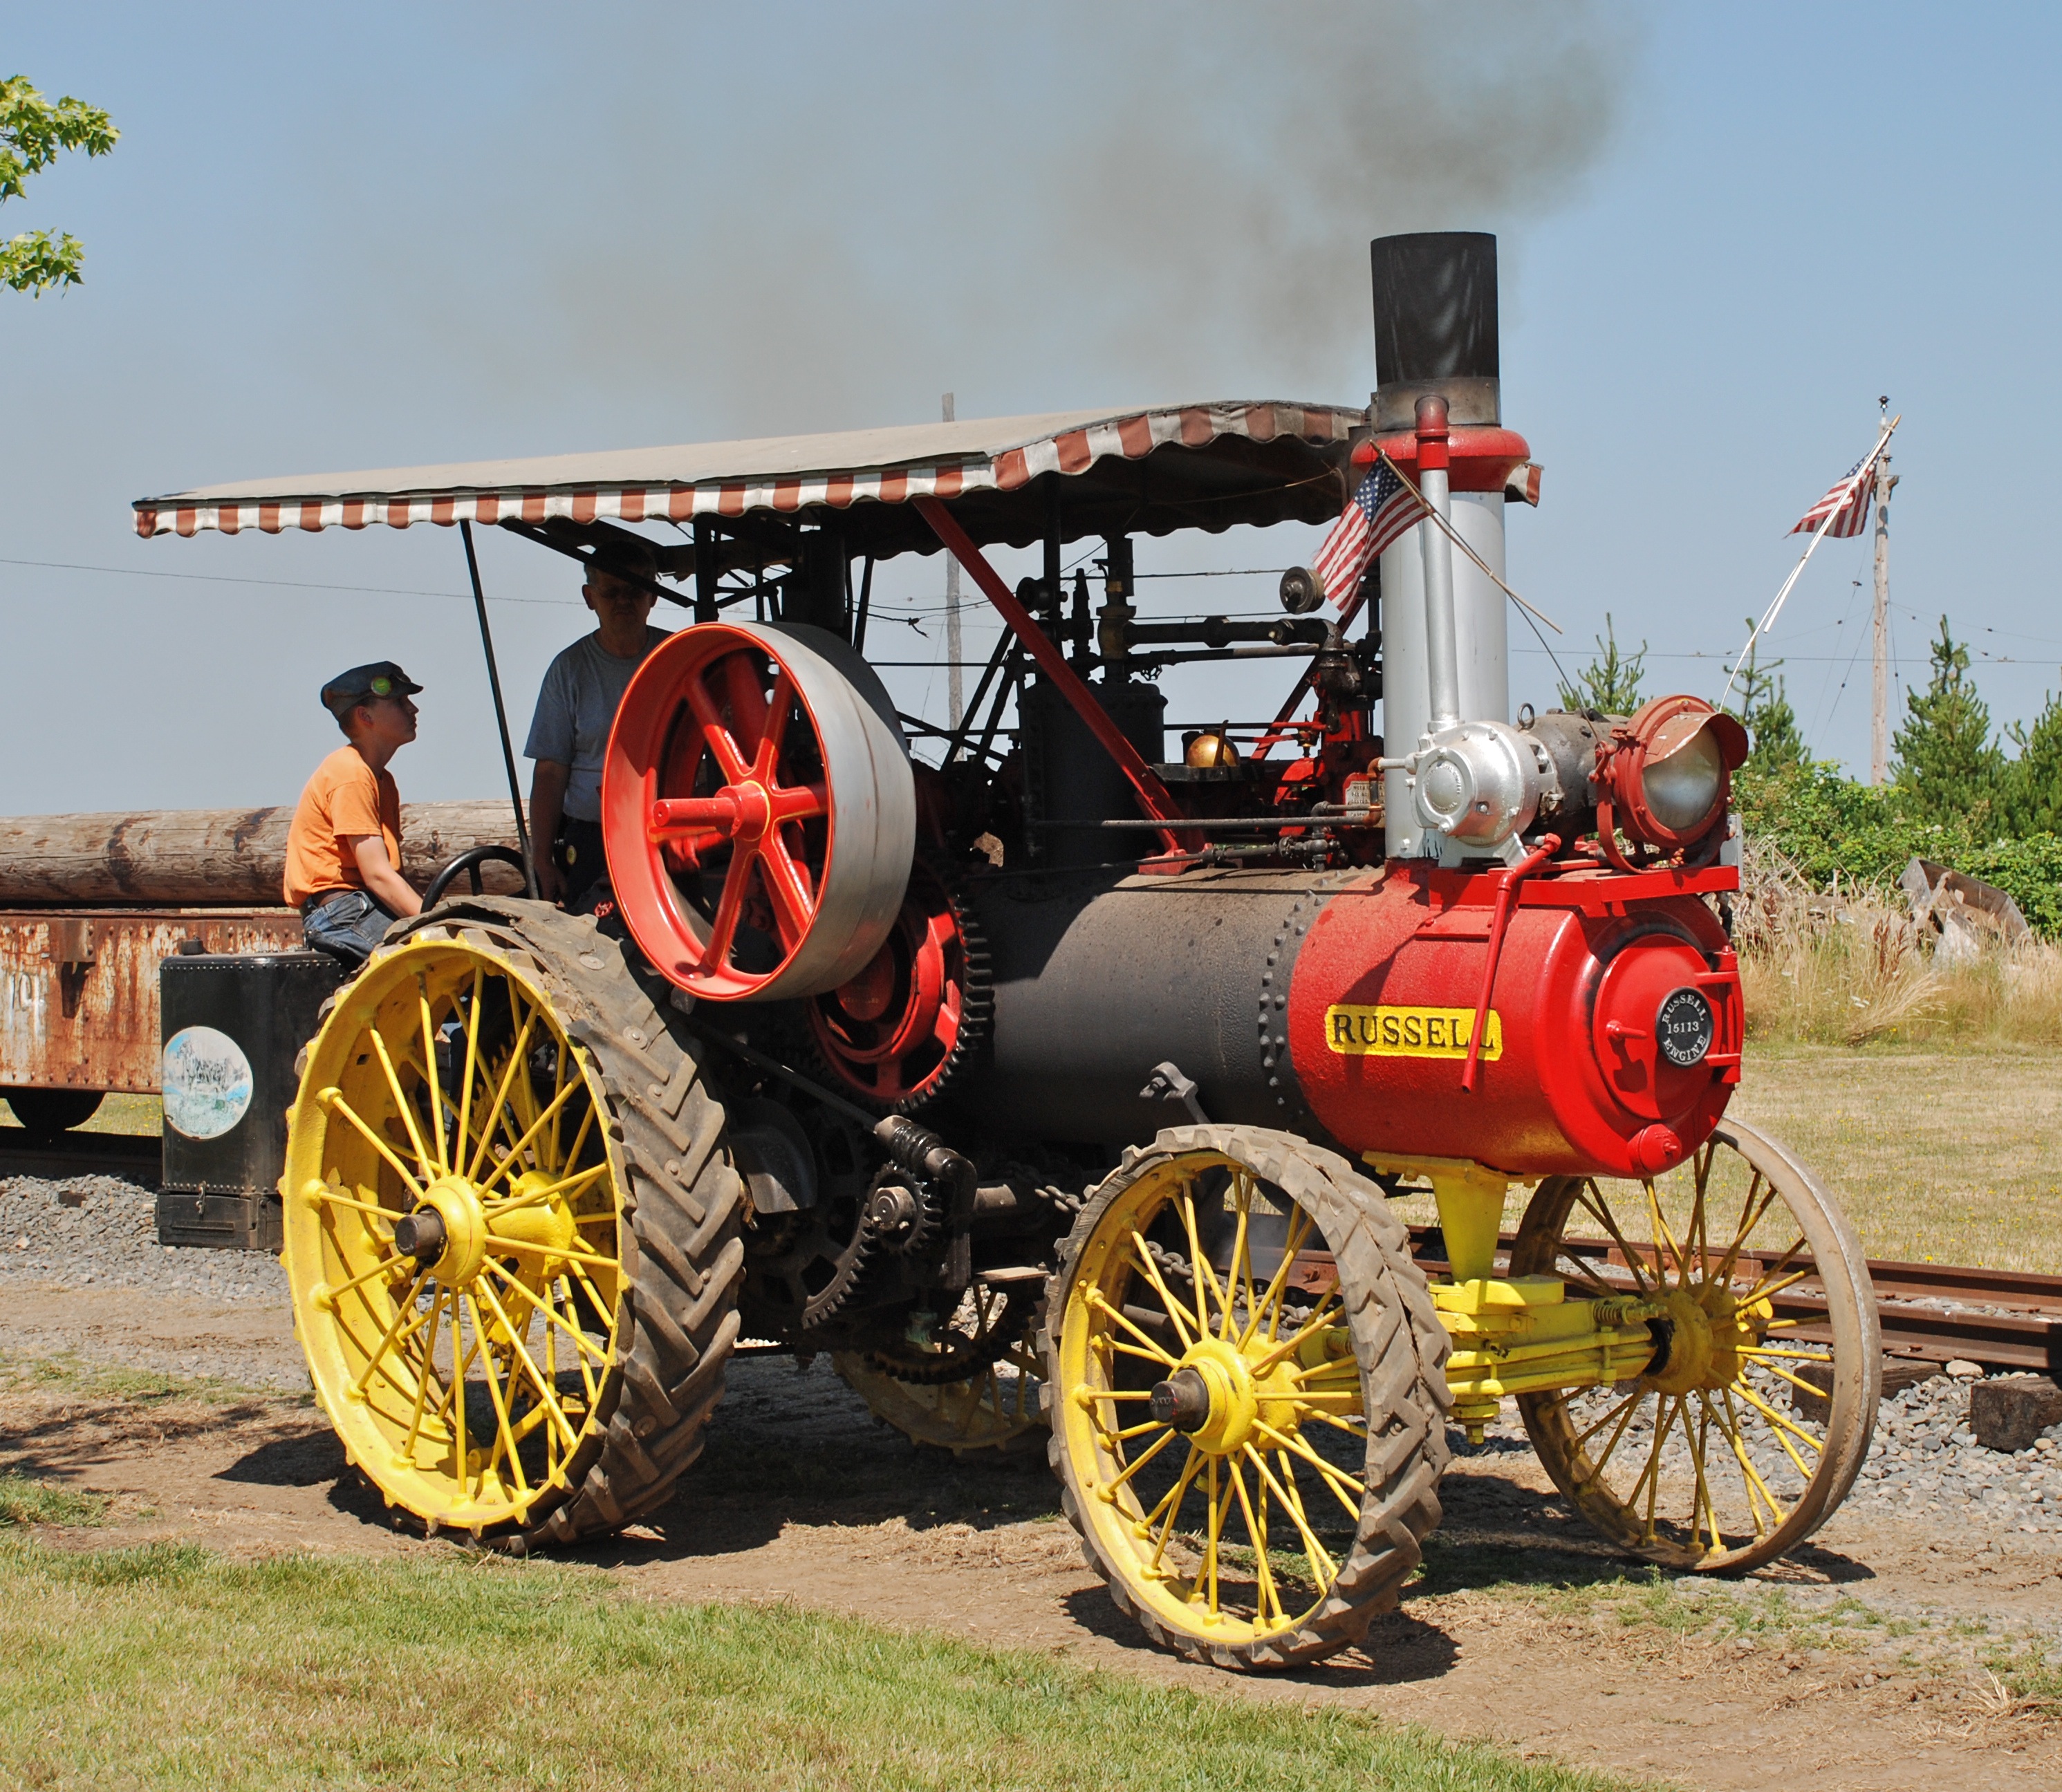 Russell Steam Tractor #17